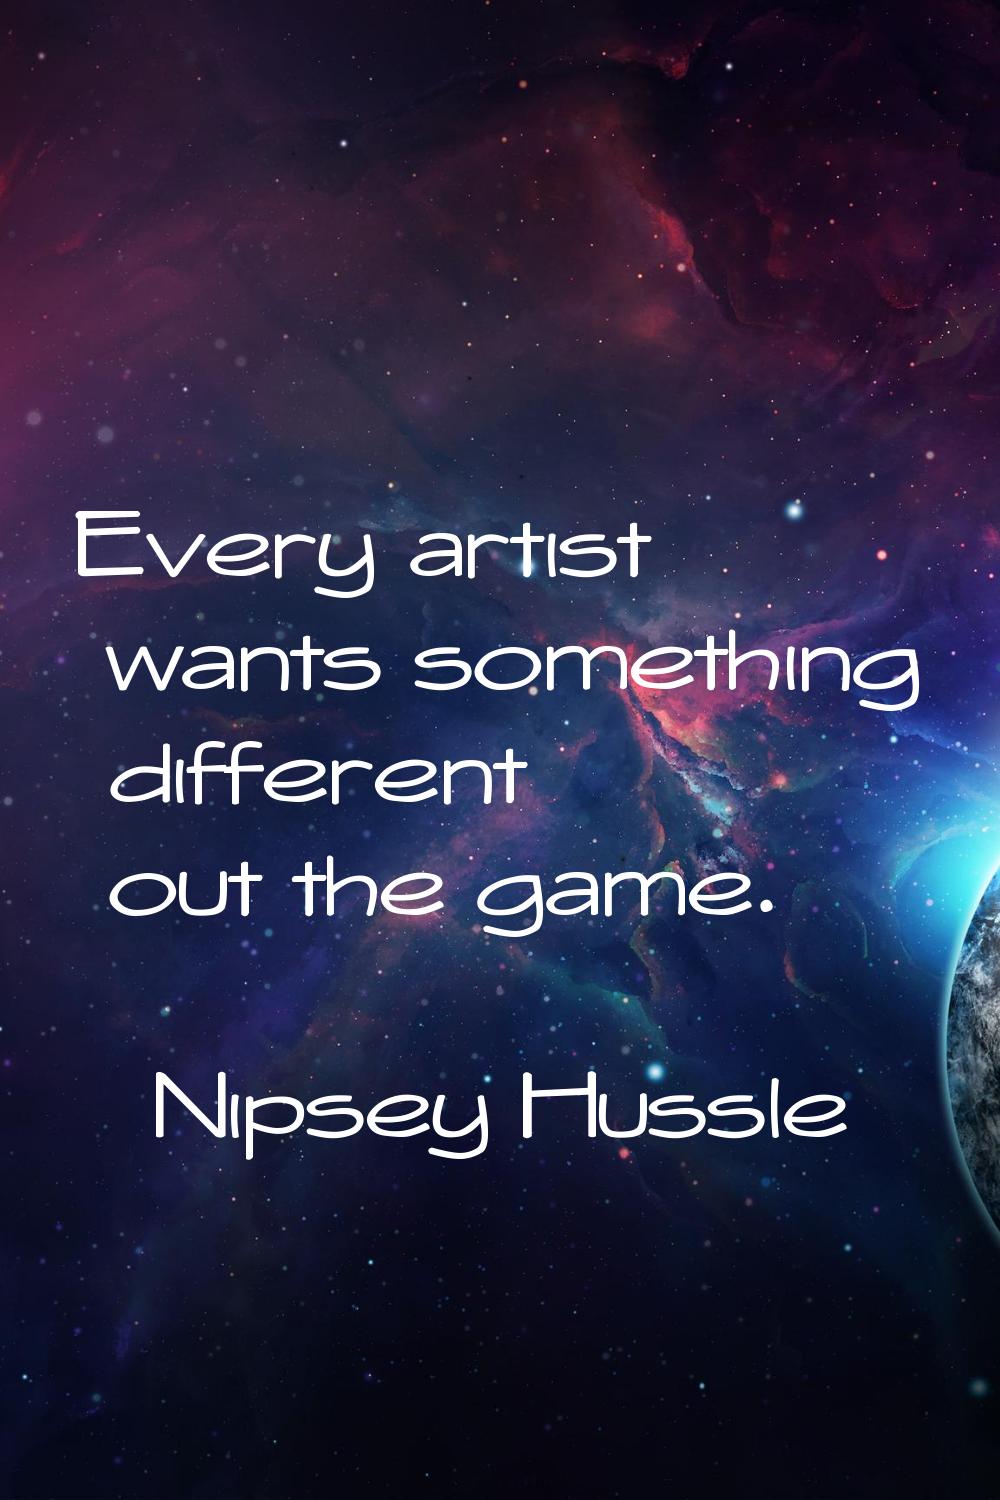 Every artist wants something different out the game.